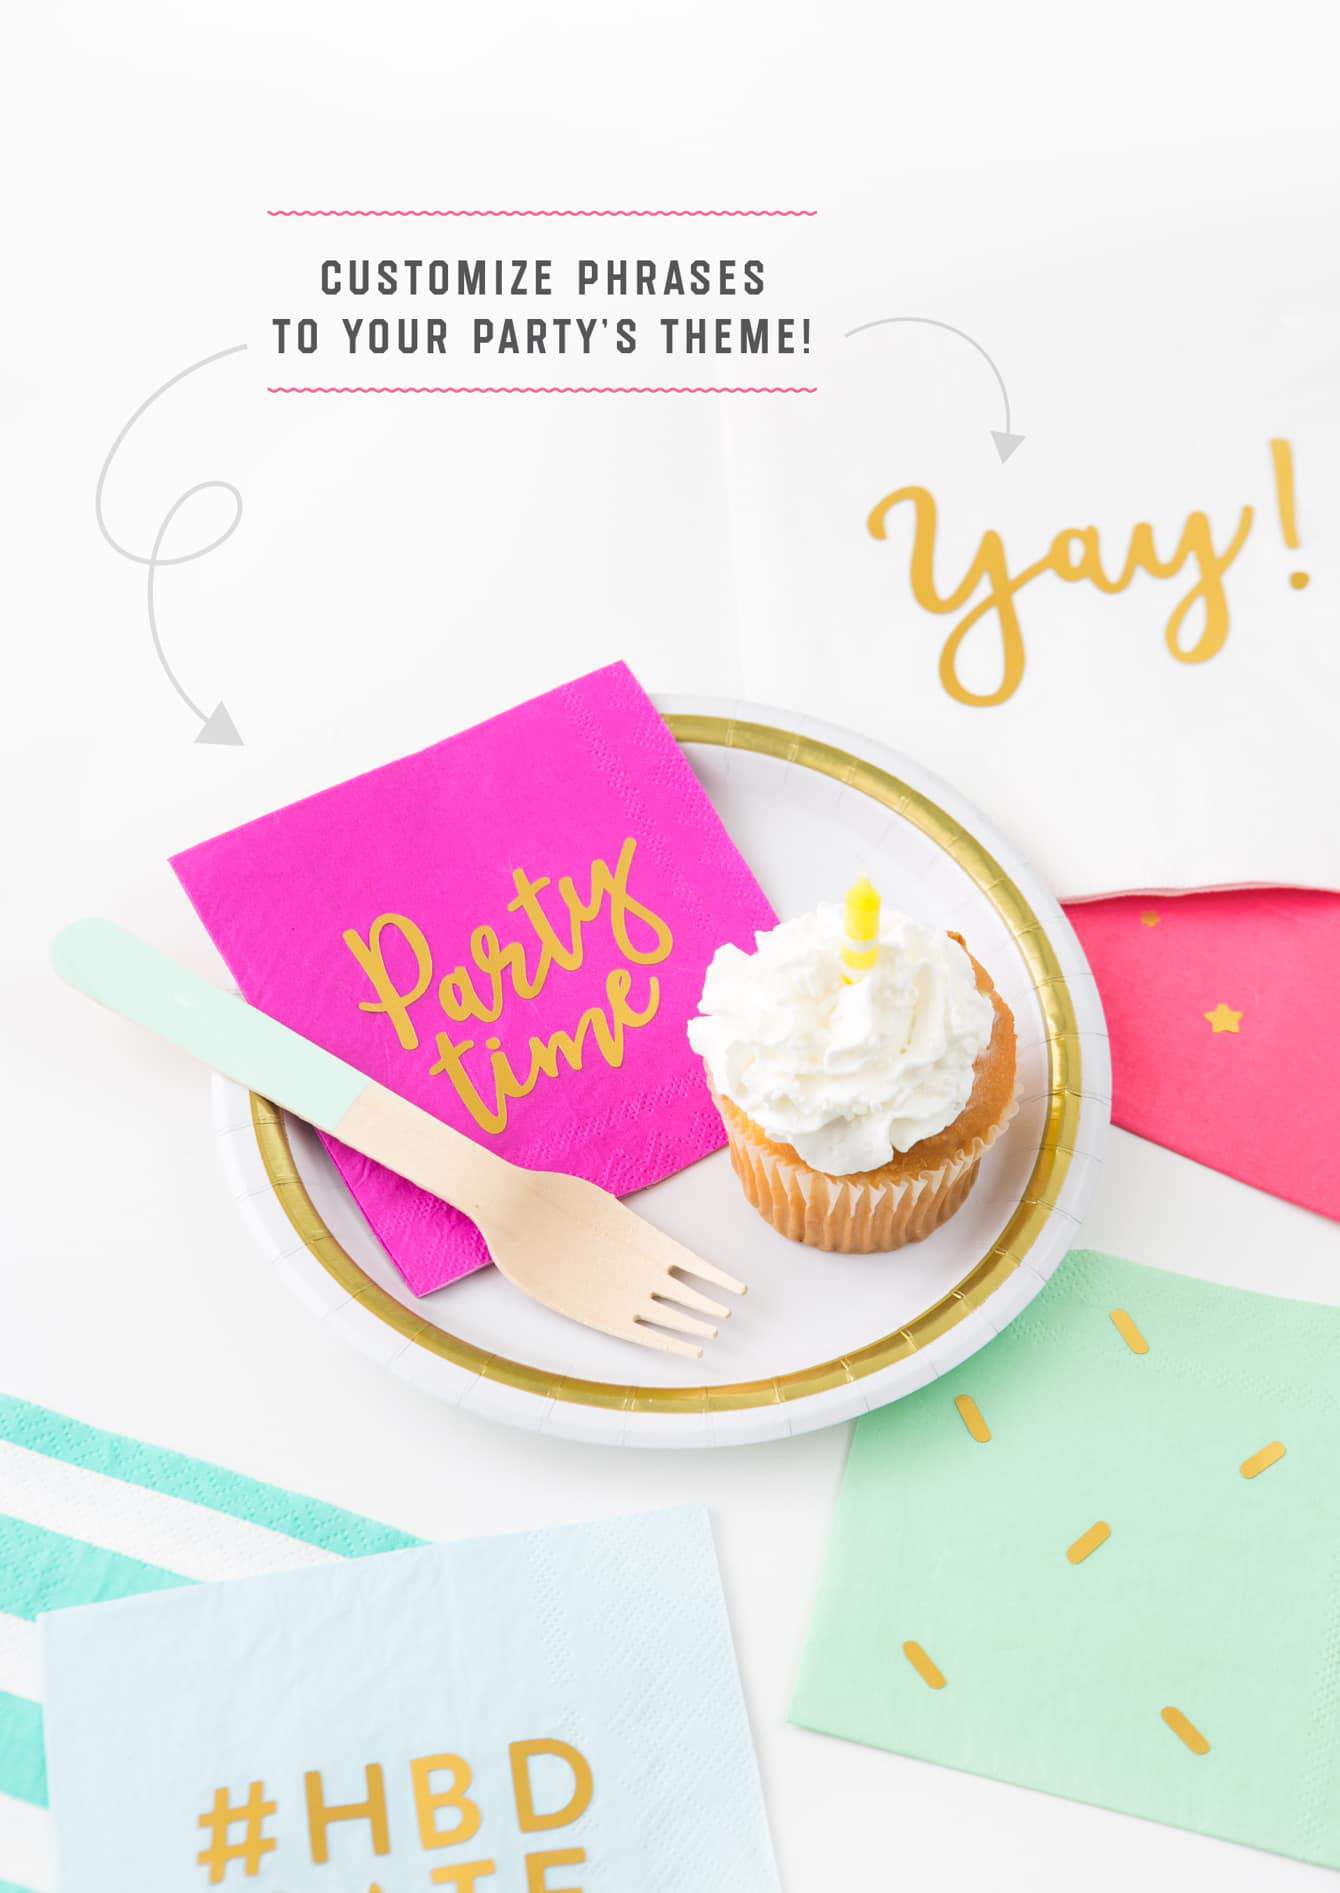 Customize phrases to party theme on gold foil DIY napkins. Pink napkin with phrase "party time" and sprinkle napkin with cupcake.